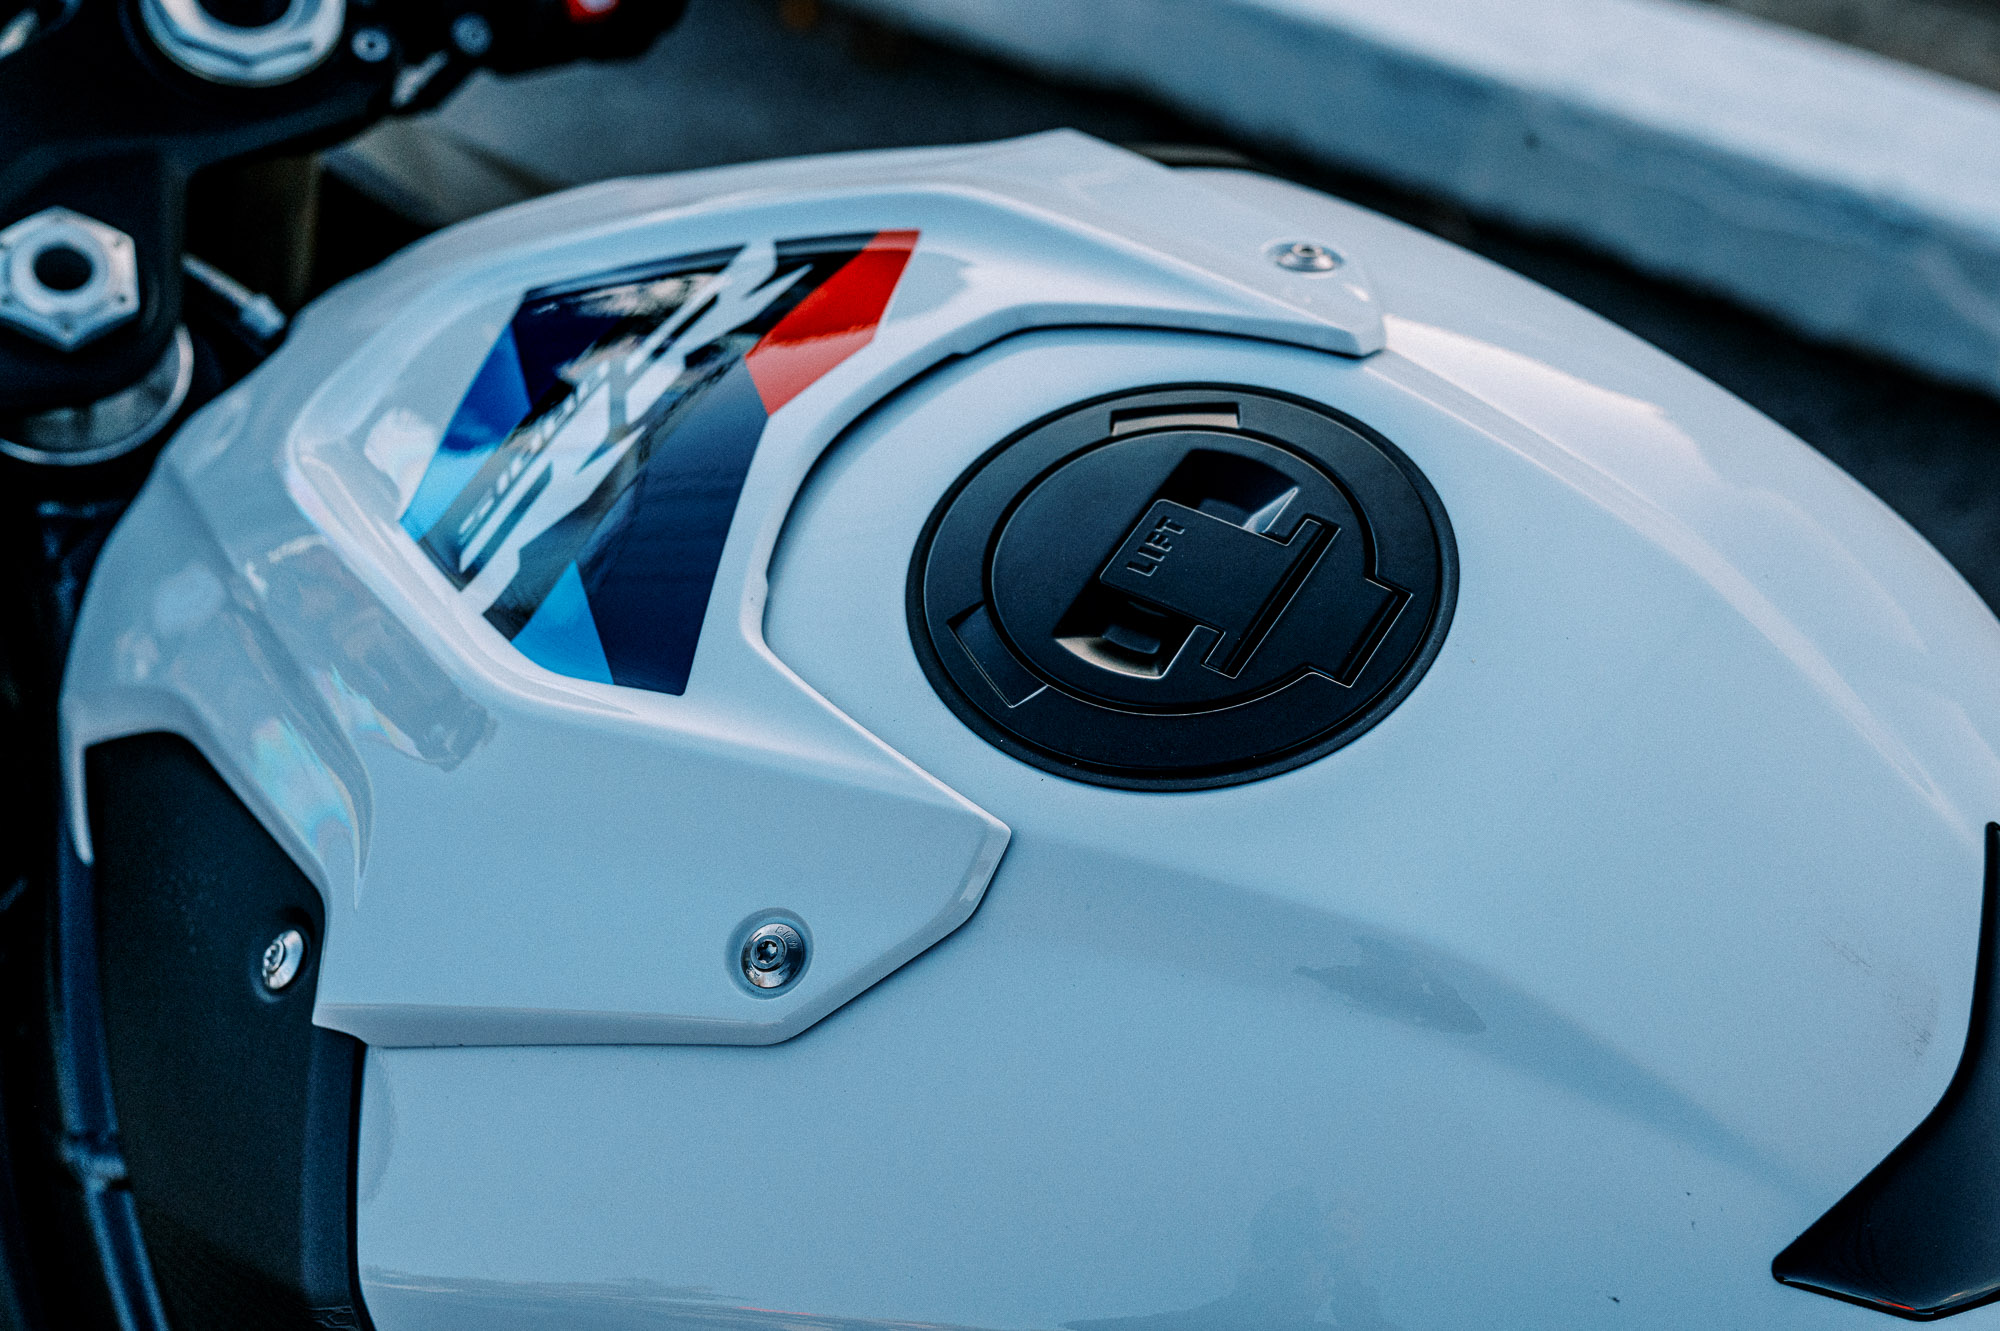 A 2023 BMW S 1000 RR motorcycle parked outside at dusk in Sydney - detail